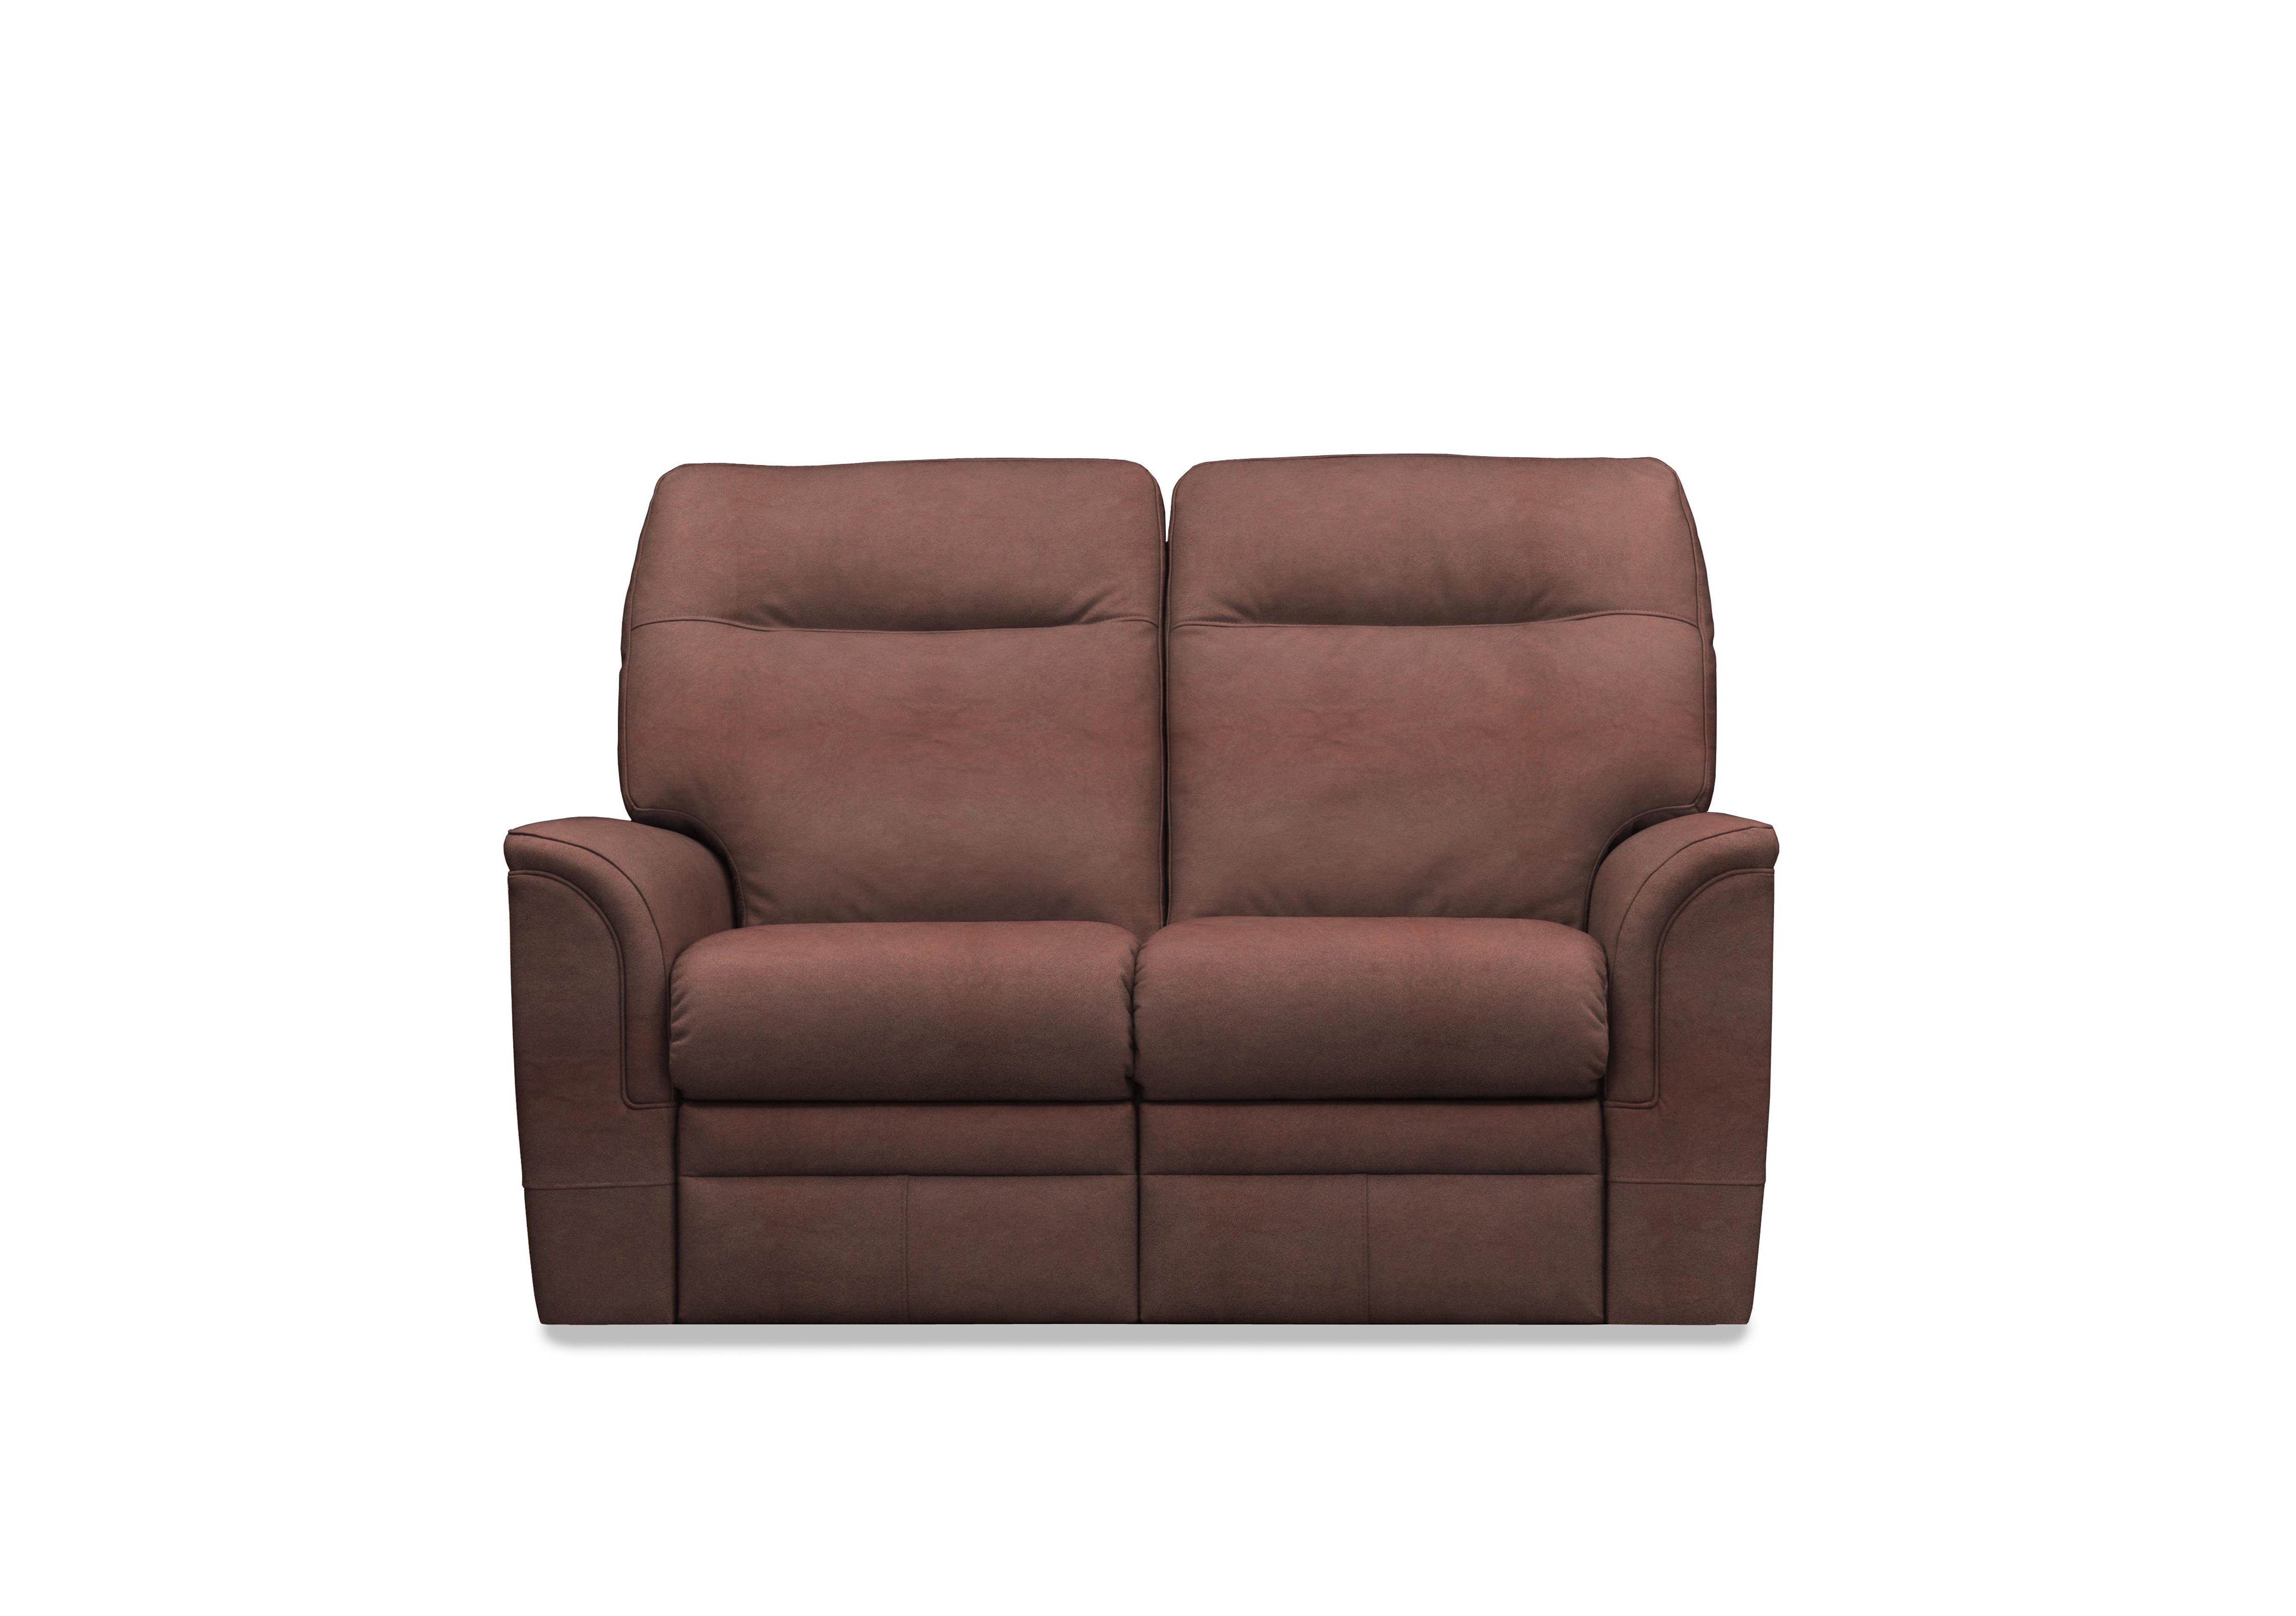 Hudson 23 Leather 2 Seater Sofa in Revolution Chocolate 009027-00 on Furniture Village